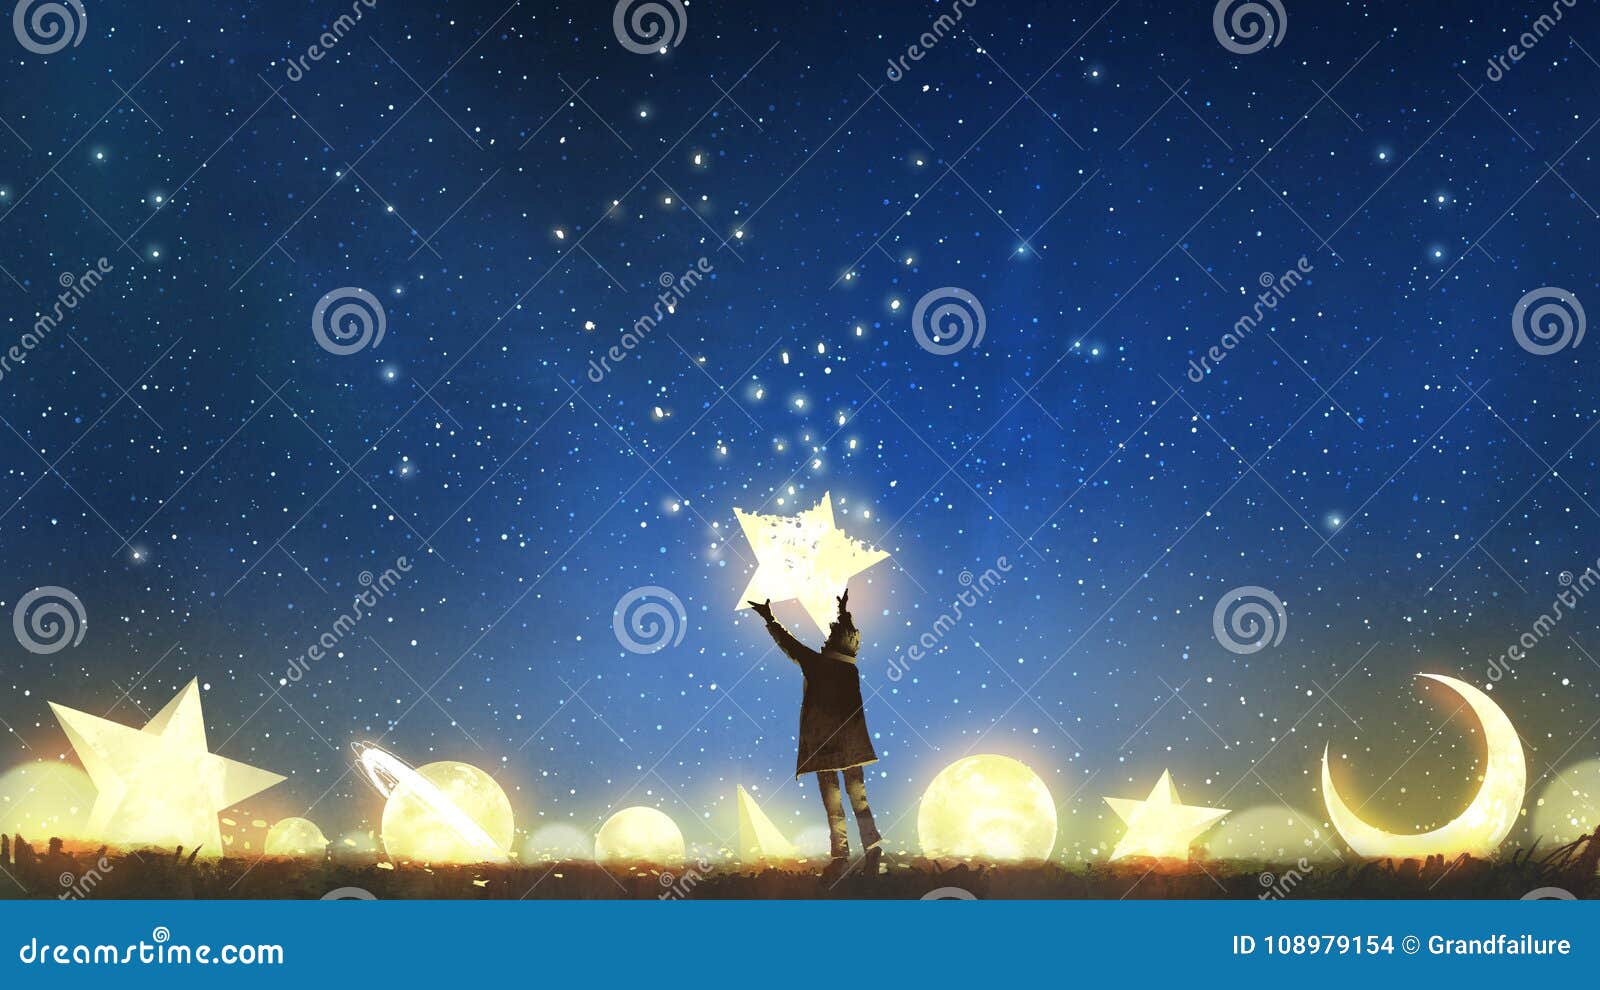 boy holding the star up in the sky